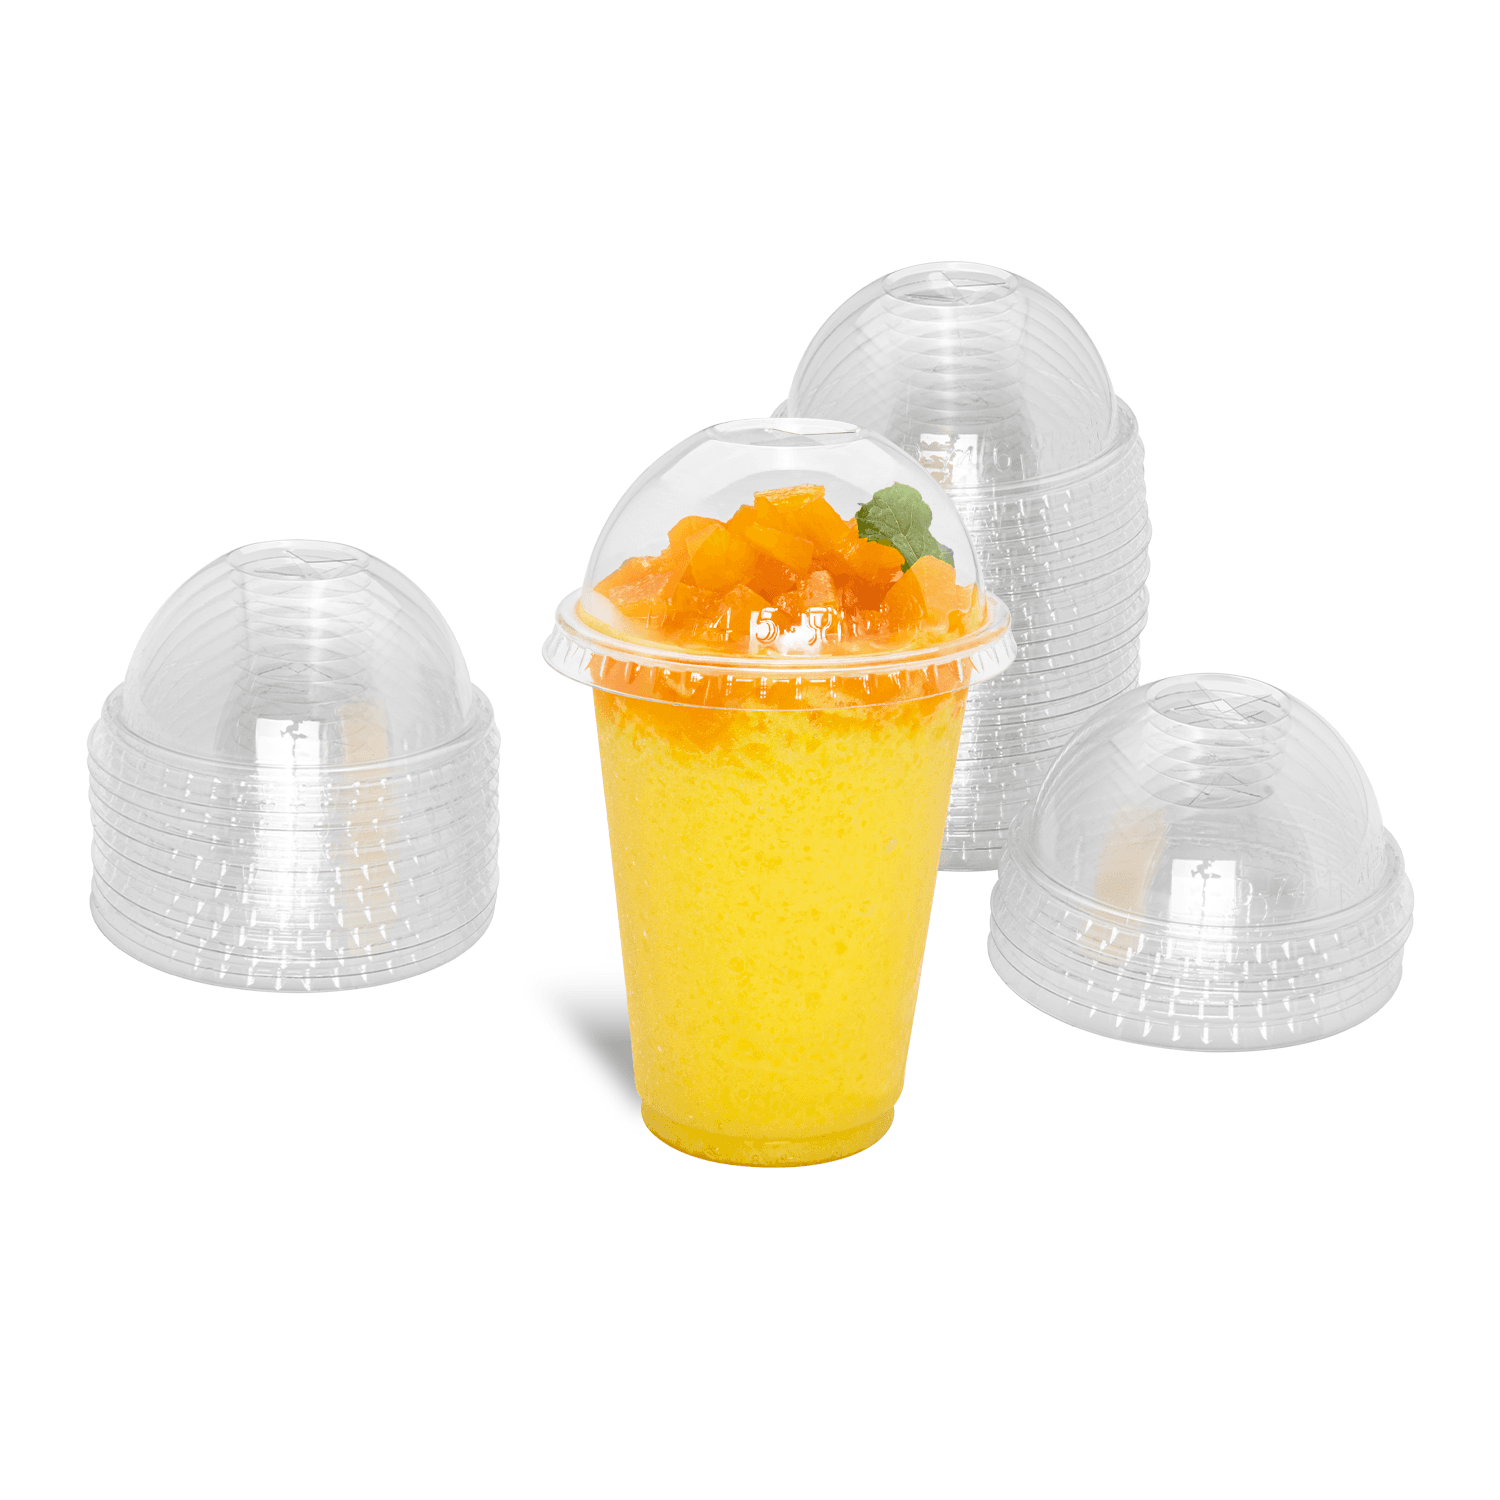 Karat PET Clear Dome Lid for 7oz PET Cup with matching cup and yellow drink